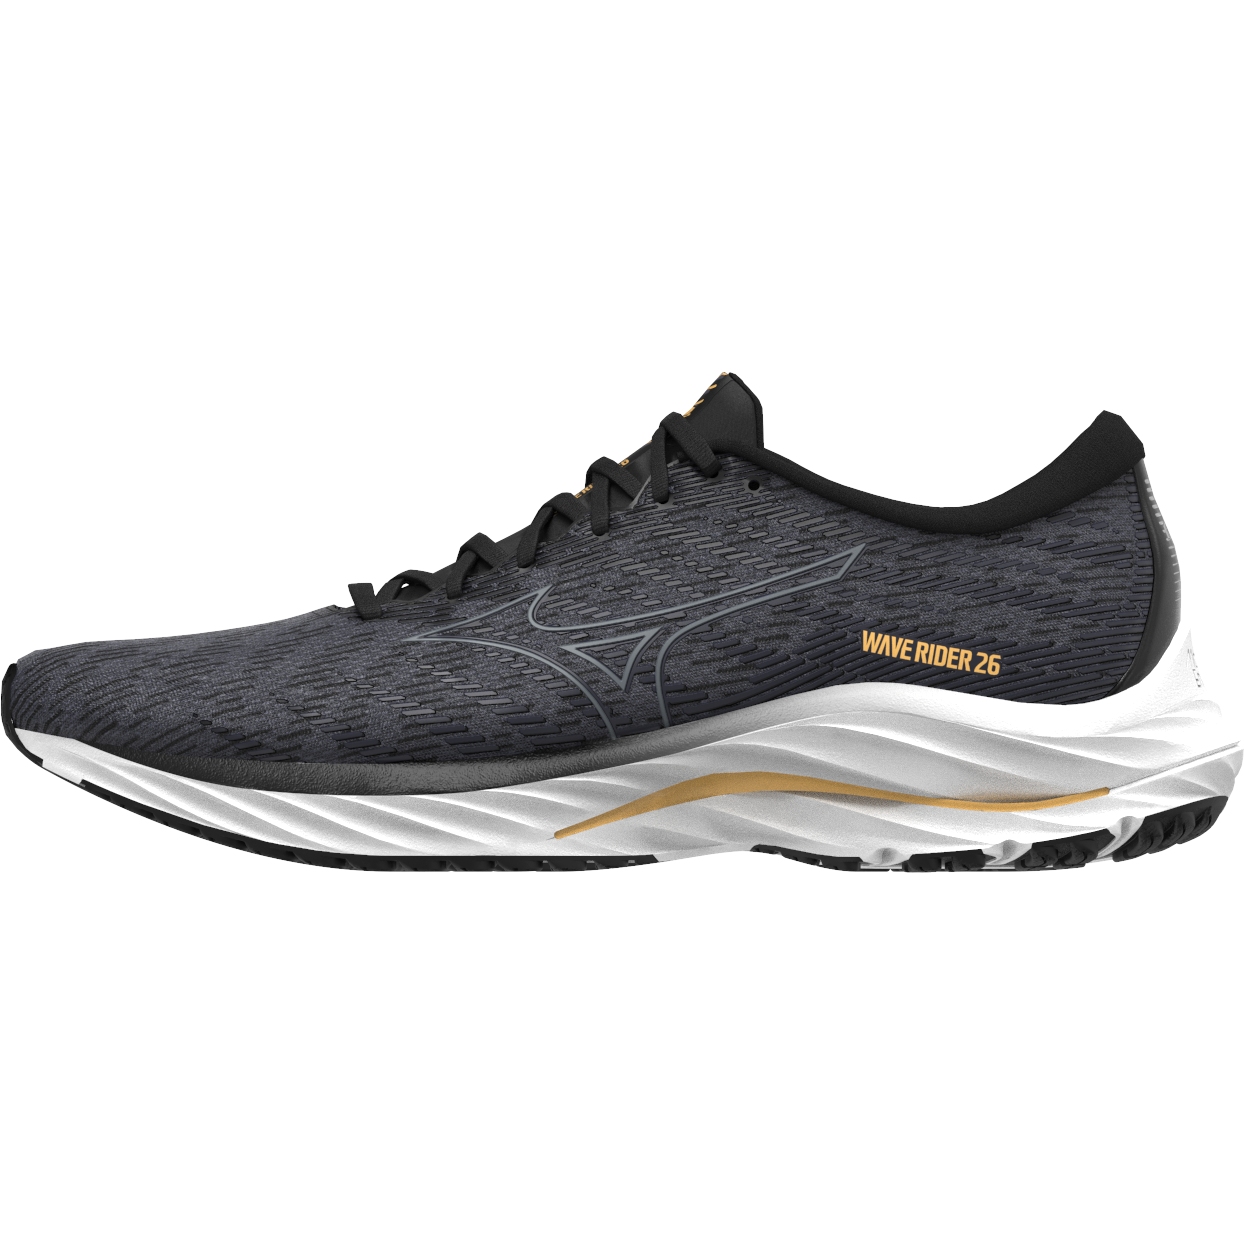 Picture of Mizuno Wave Rider 26 Wide Running Shoes - Odyssey Gray / Metallic Gray / Pale Marigold